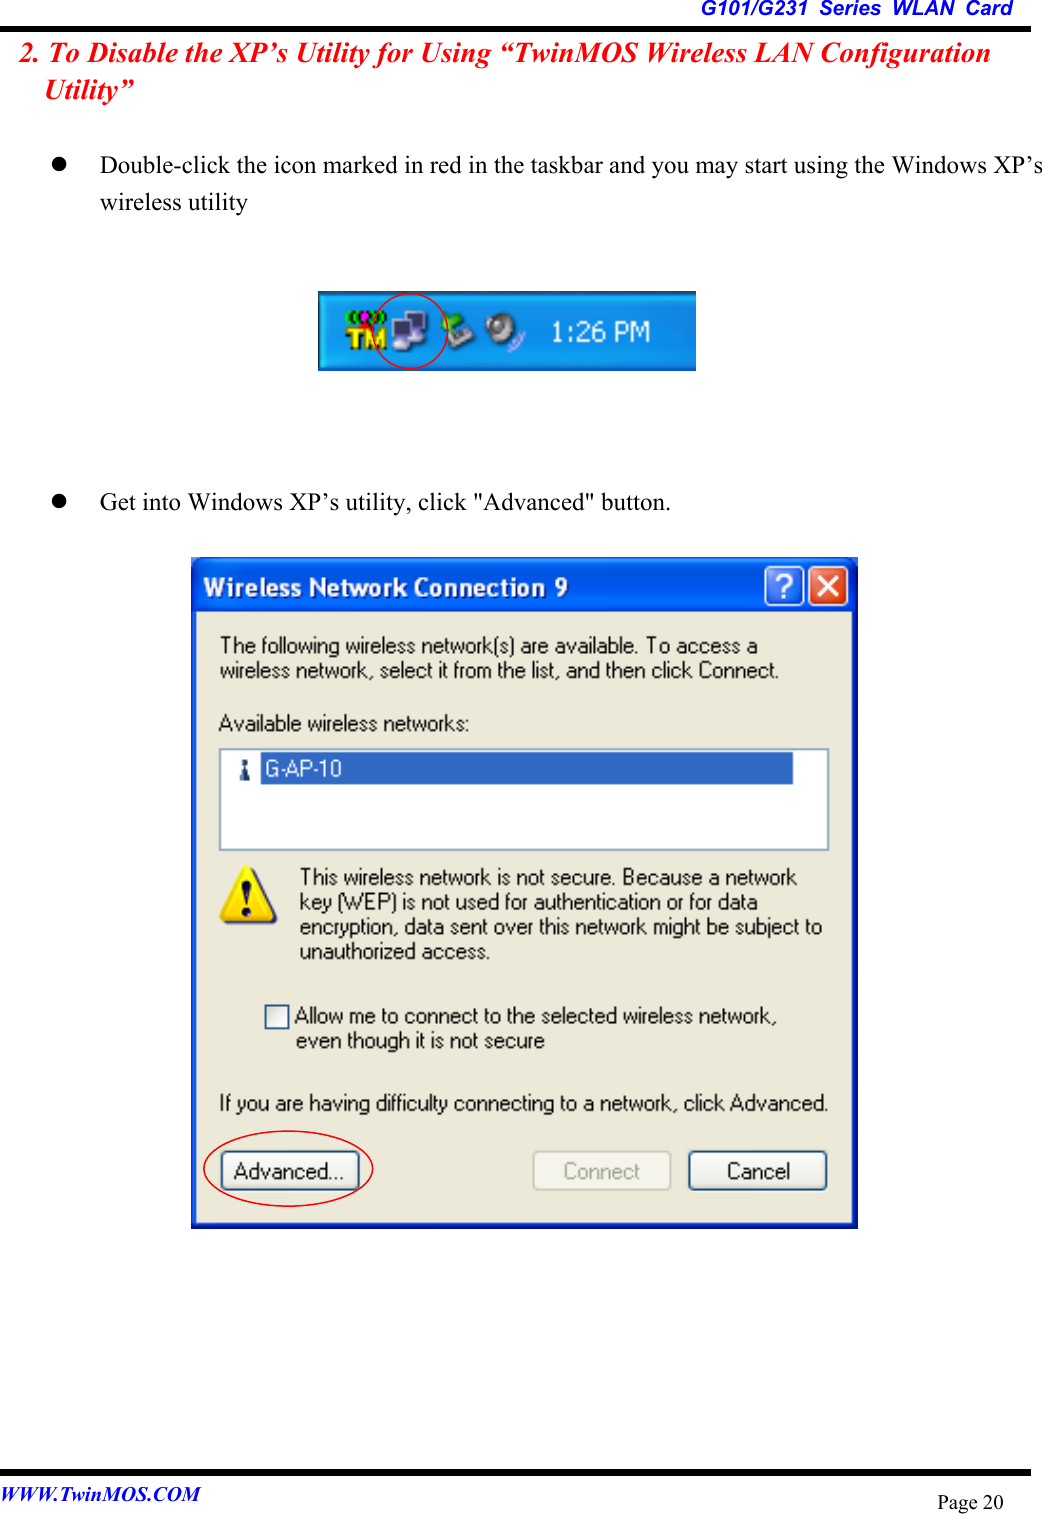   G101/G231 Series WLAN Card WWW.TwinMOS.COM  Page 202. To Disable the XP’s Utility for Using “TwinMOS Wireless LAN Configuration Utility”    Double-click the icon marked in red in the taskbar and you may start using the Windows XP’s wireless utility          Get into Windows XP’s utility, click &quot;Advanced&quot; button.                          